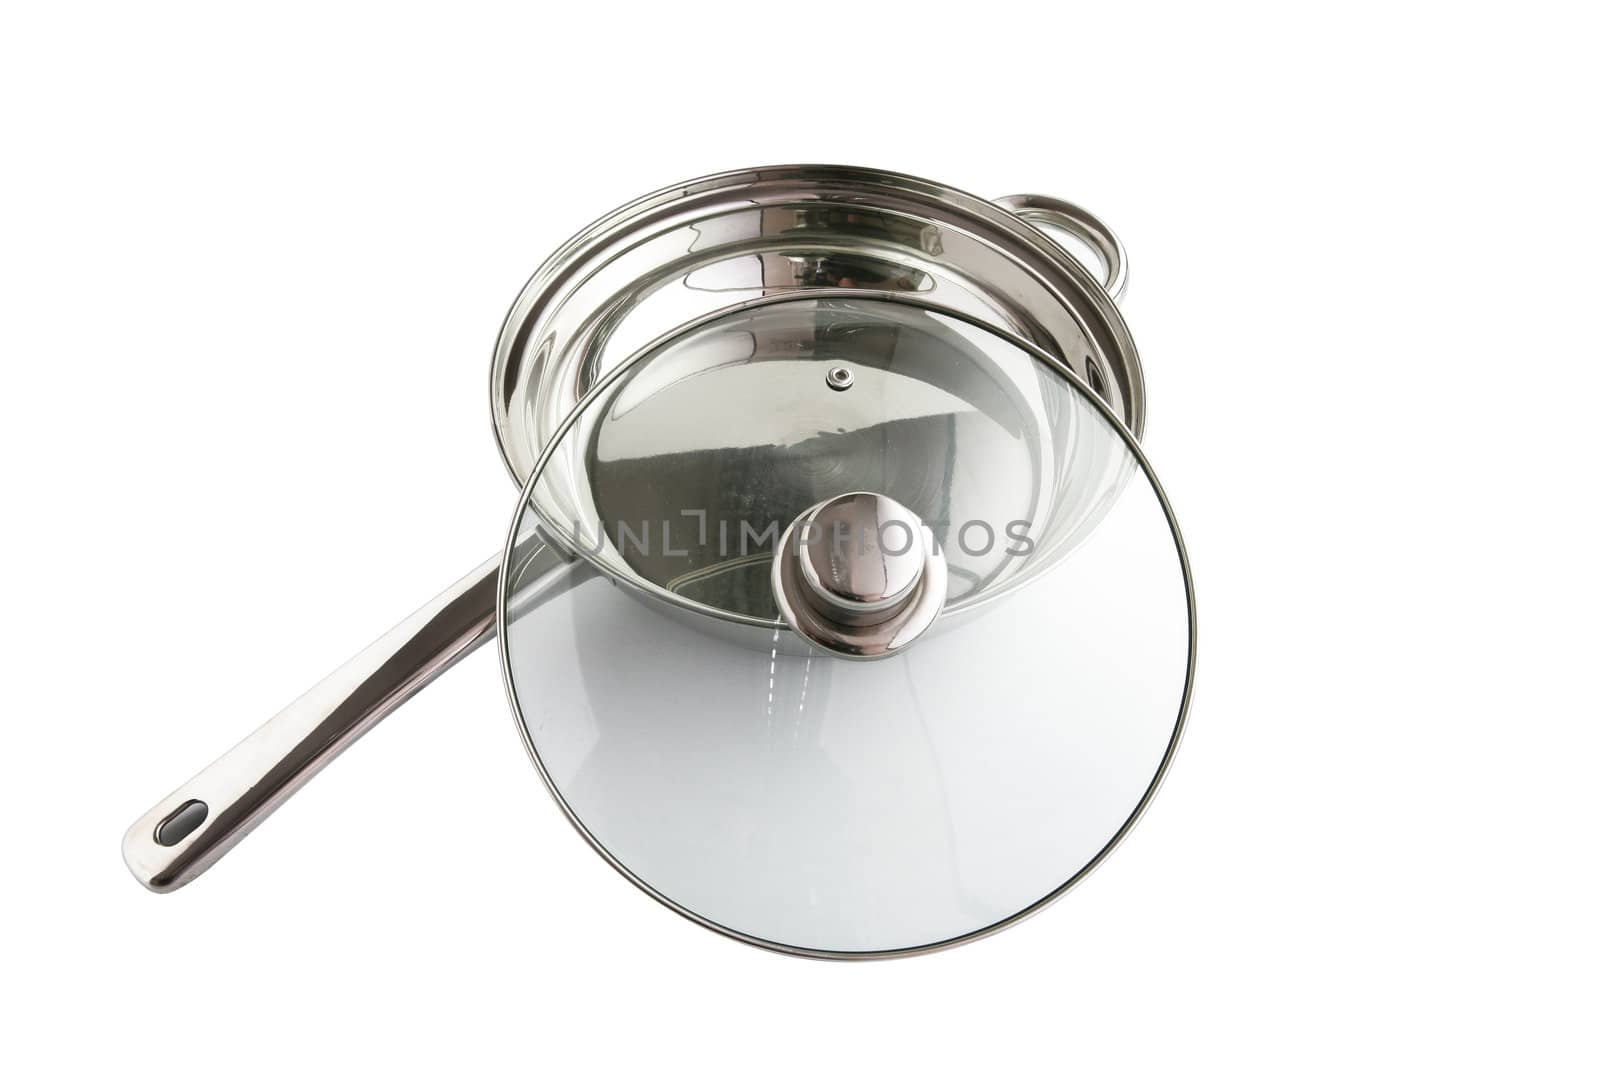 Saucepan with a glass lid by phovoir